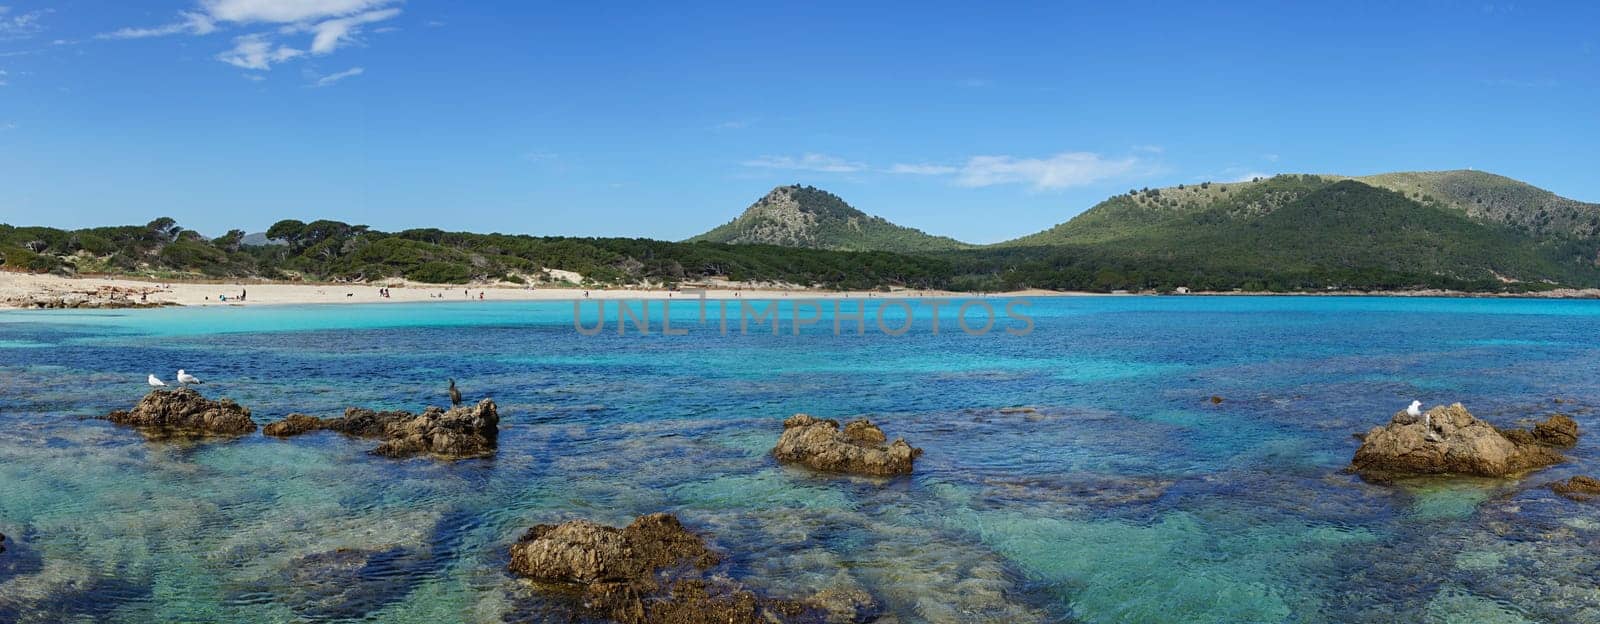 Cala Agulla's Vibrant Seascape: Sunlit Beach and Lush Mountains in Mallorca by Juanjo39